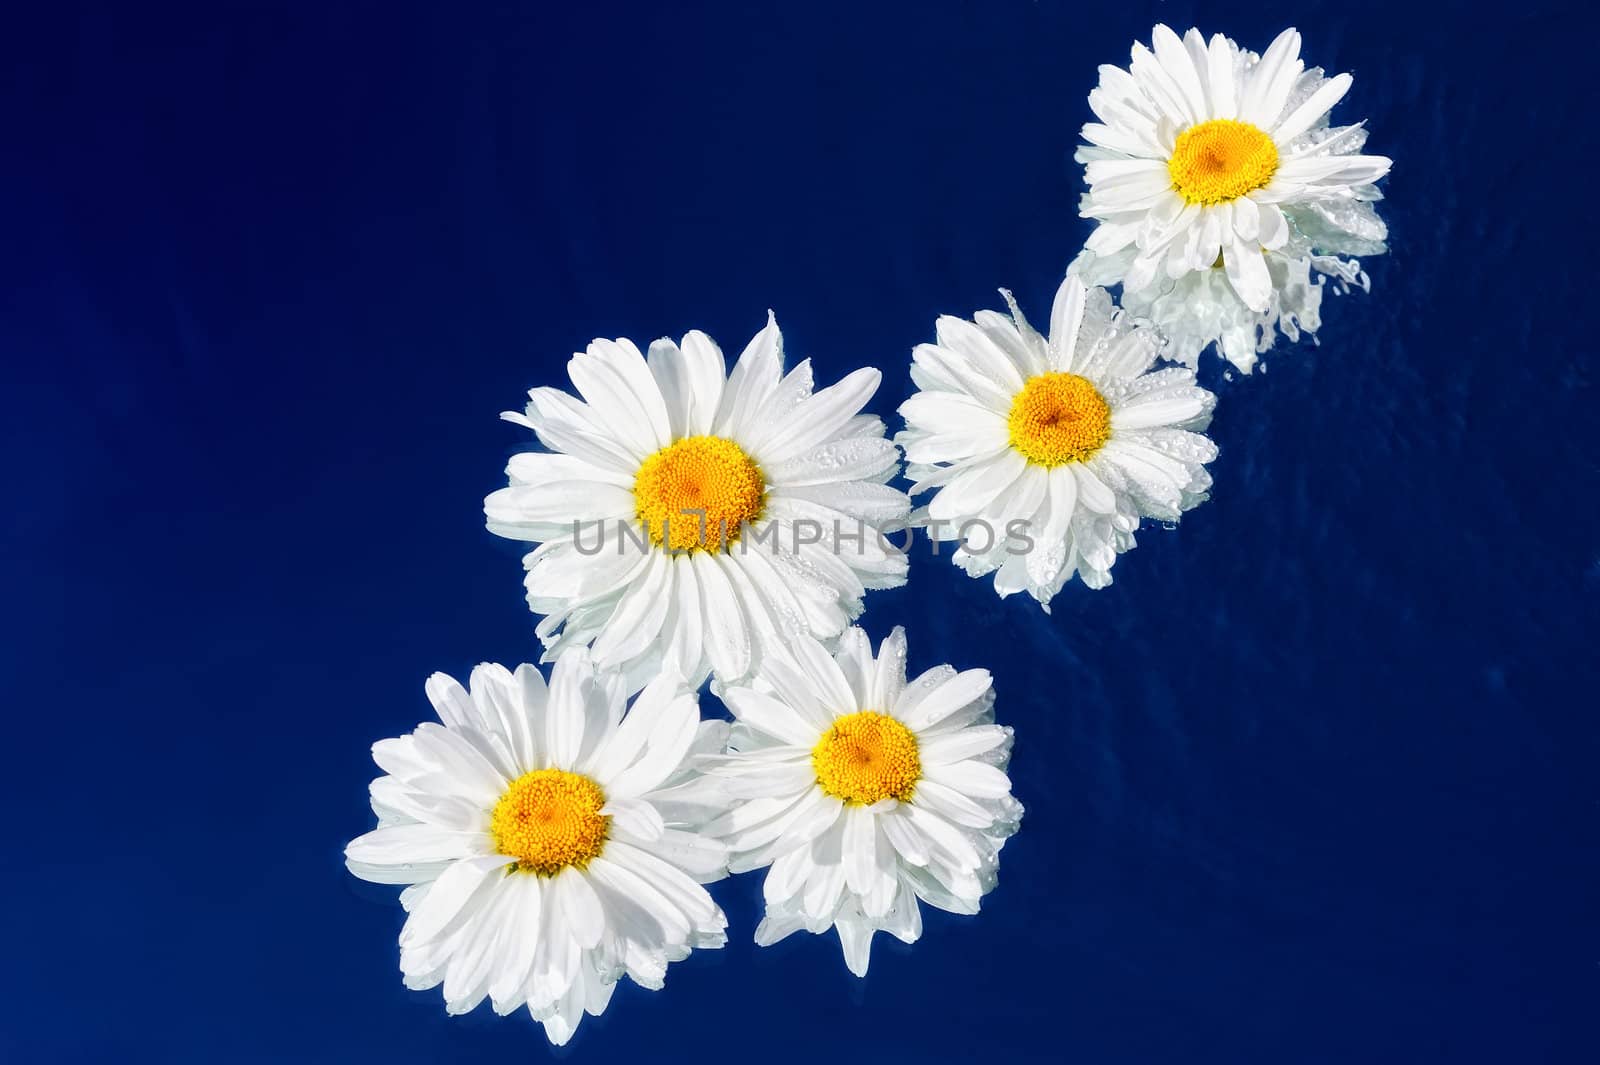 Daisies in a diagonal movement on the water surface